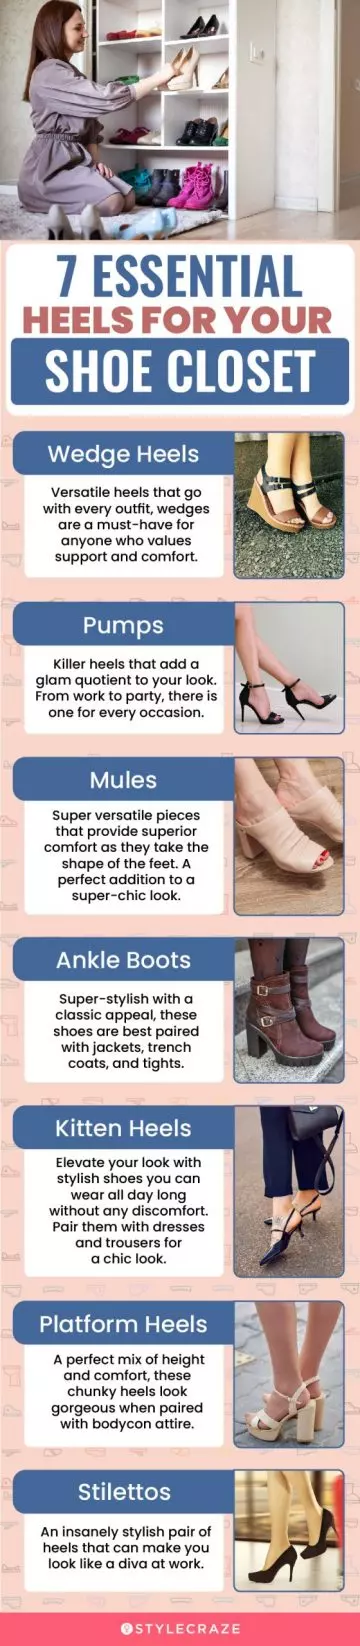 7 essential heels for your shoe closet (infographic)